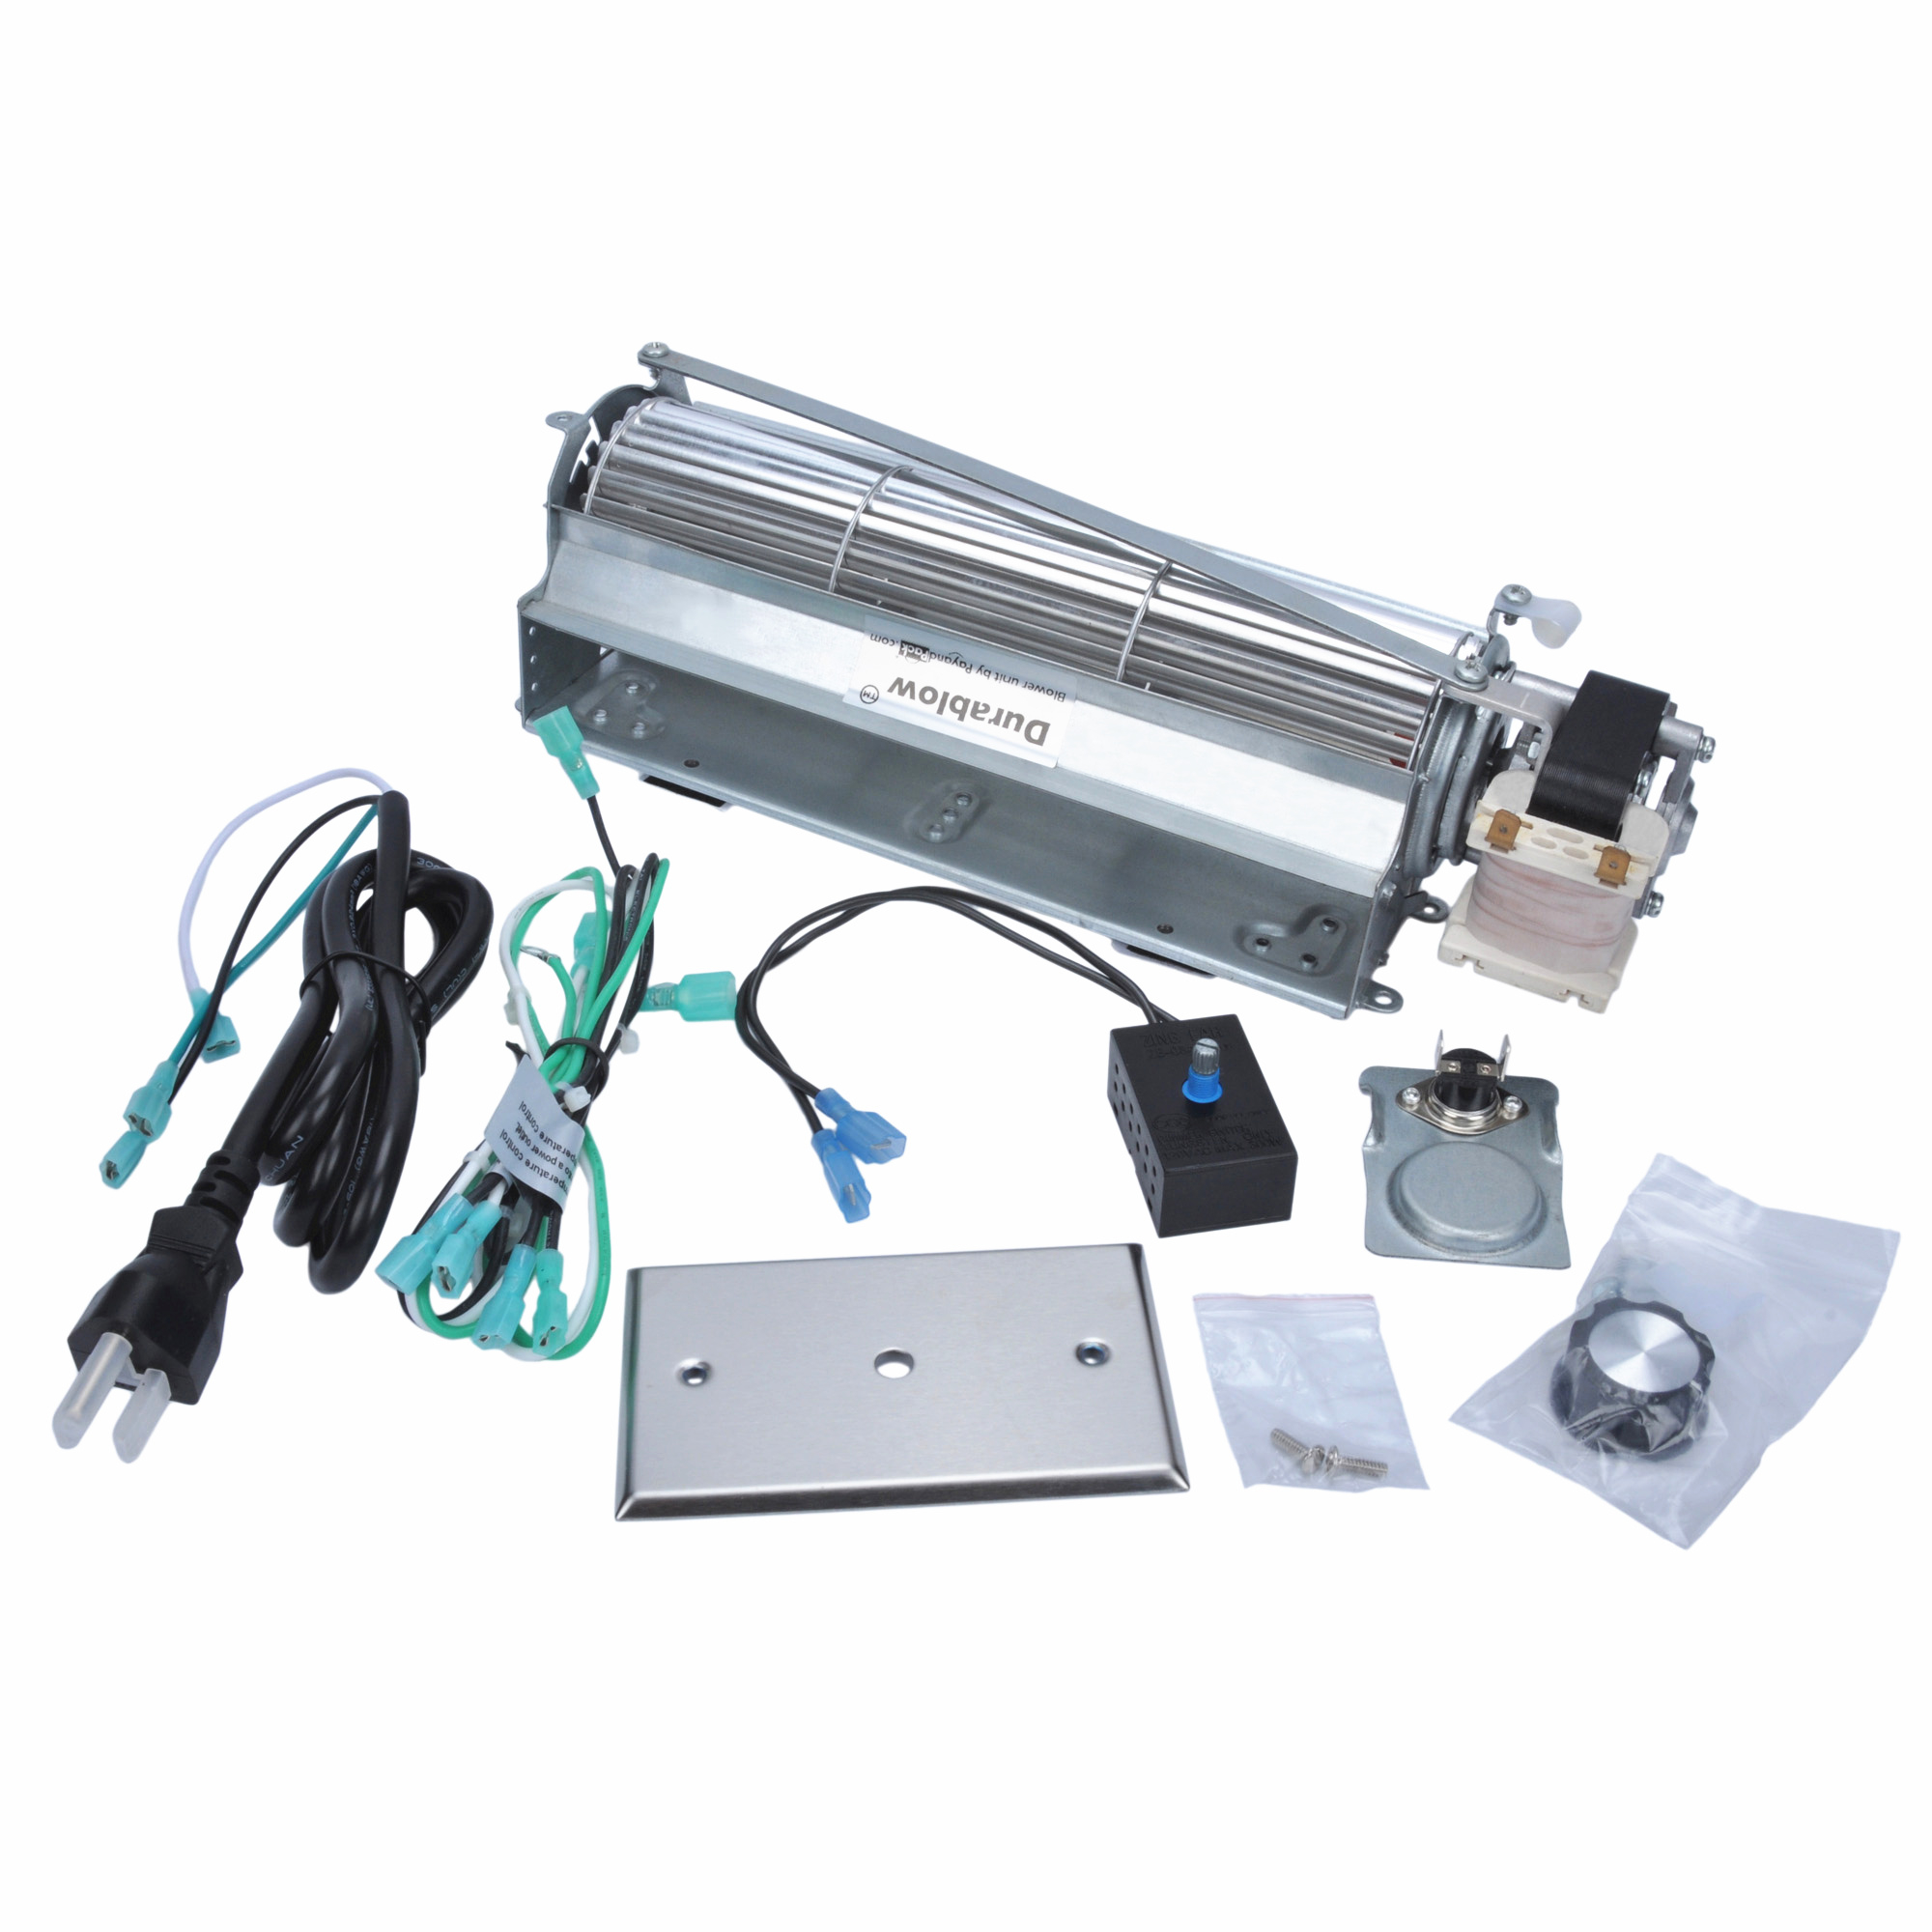 Details About Durablow Fireplace Blower Fan Kit For Heatilator Cfm Northern Flame Rotom throughout dimensions 2000 X 2000